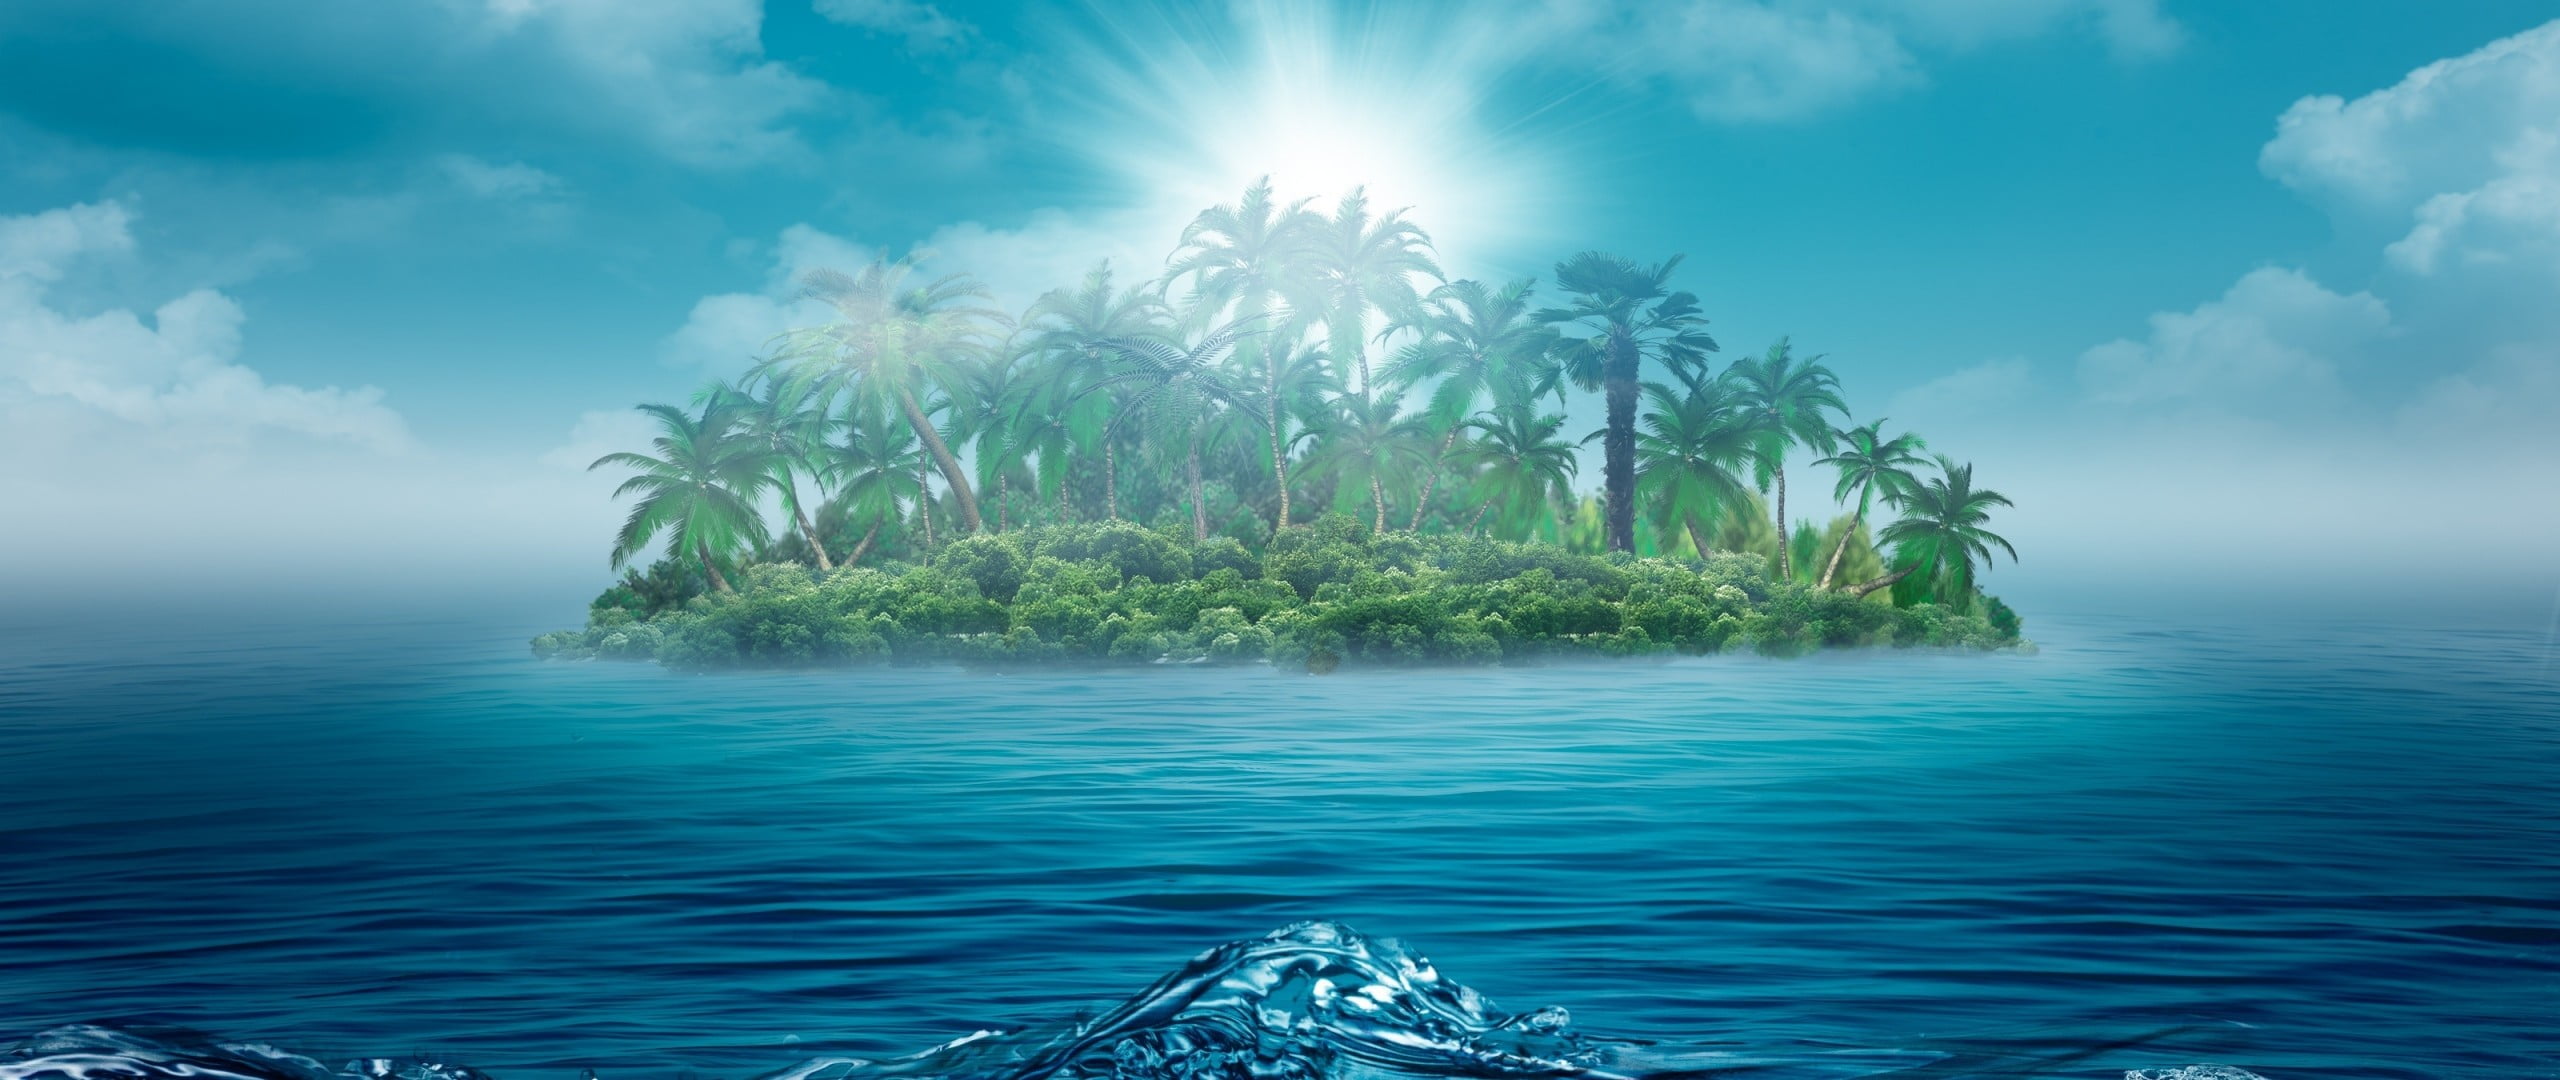 island surrounded by body of water, fantasy art, island